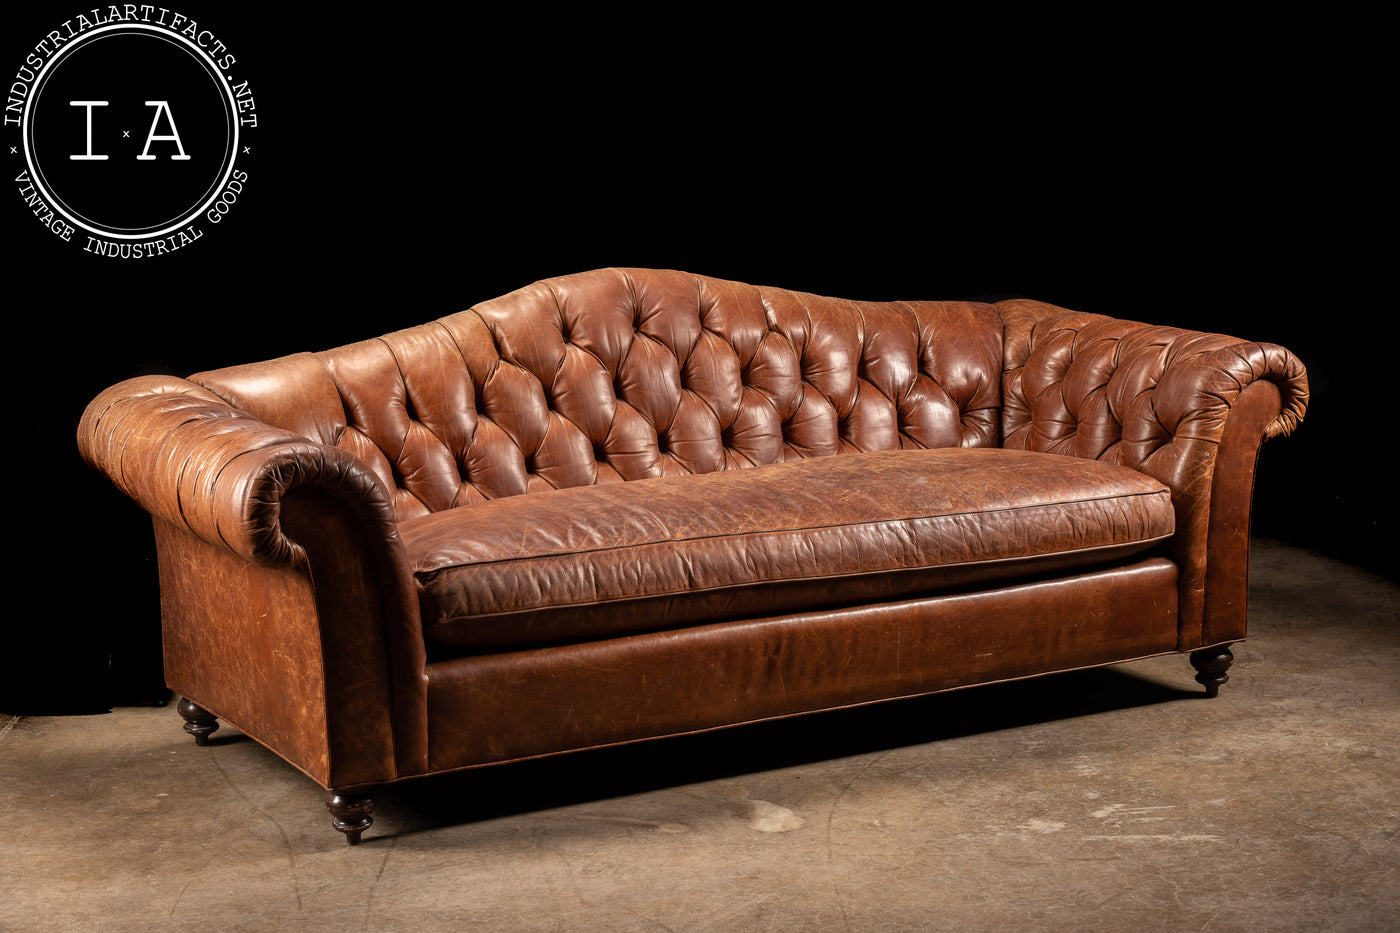 Vintage Tufted Leather Sofa In Brown